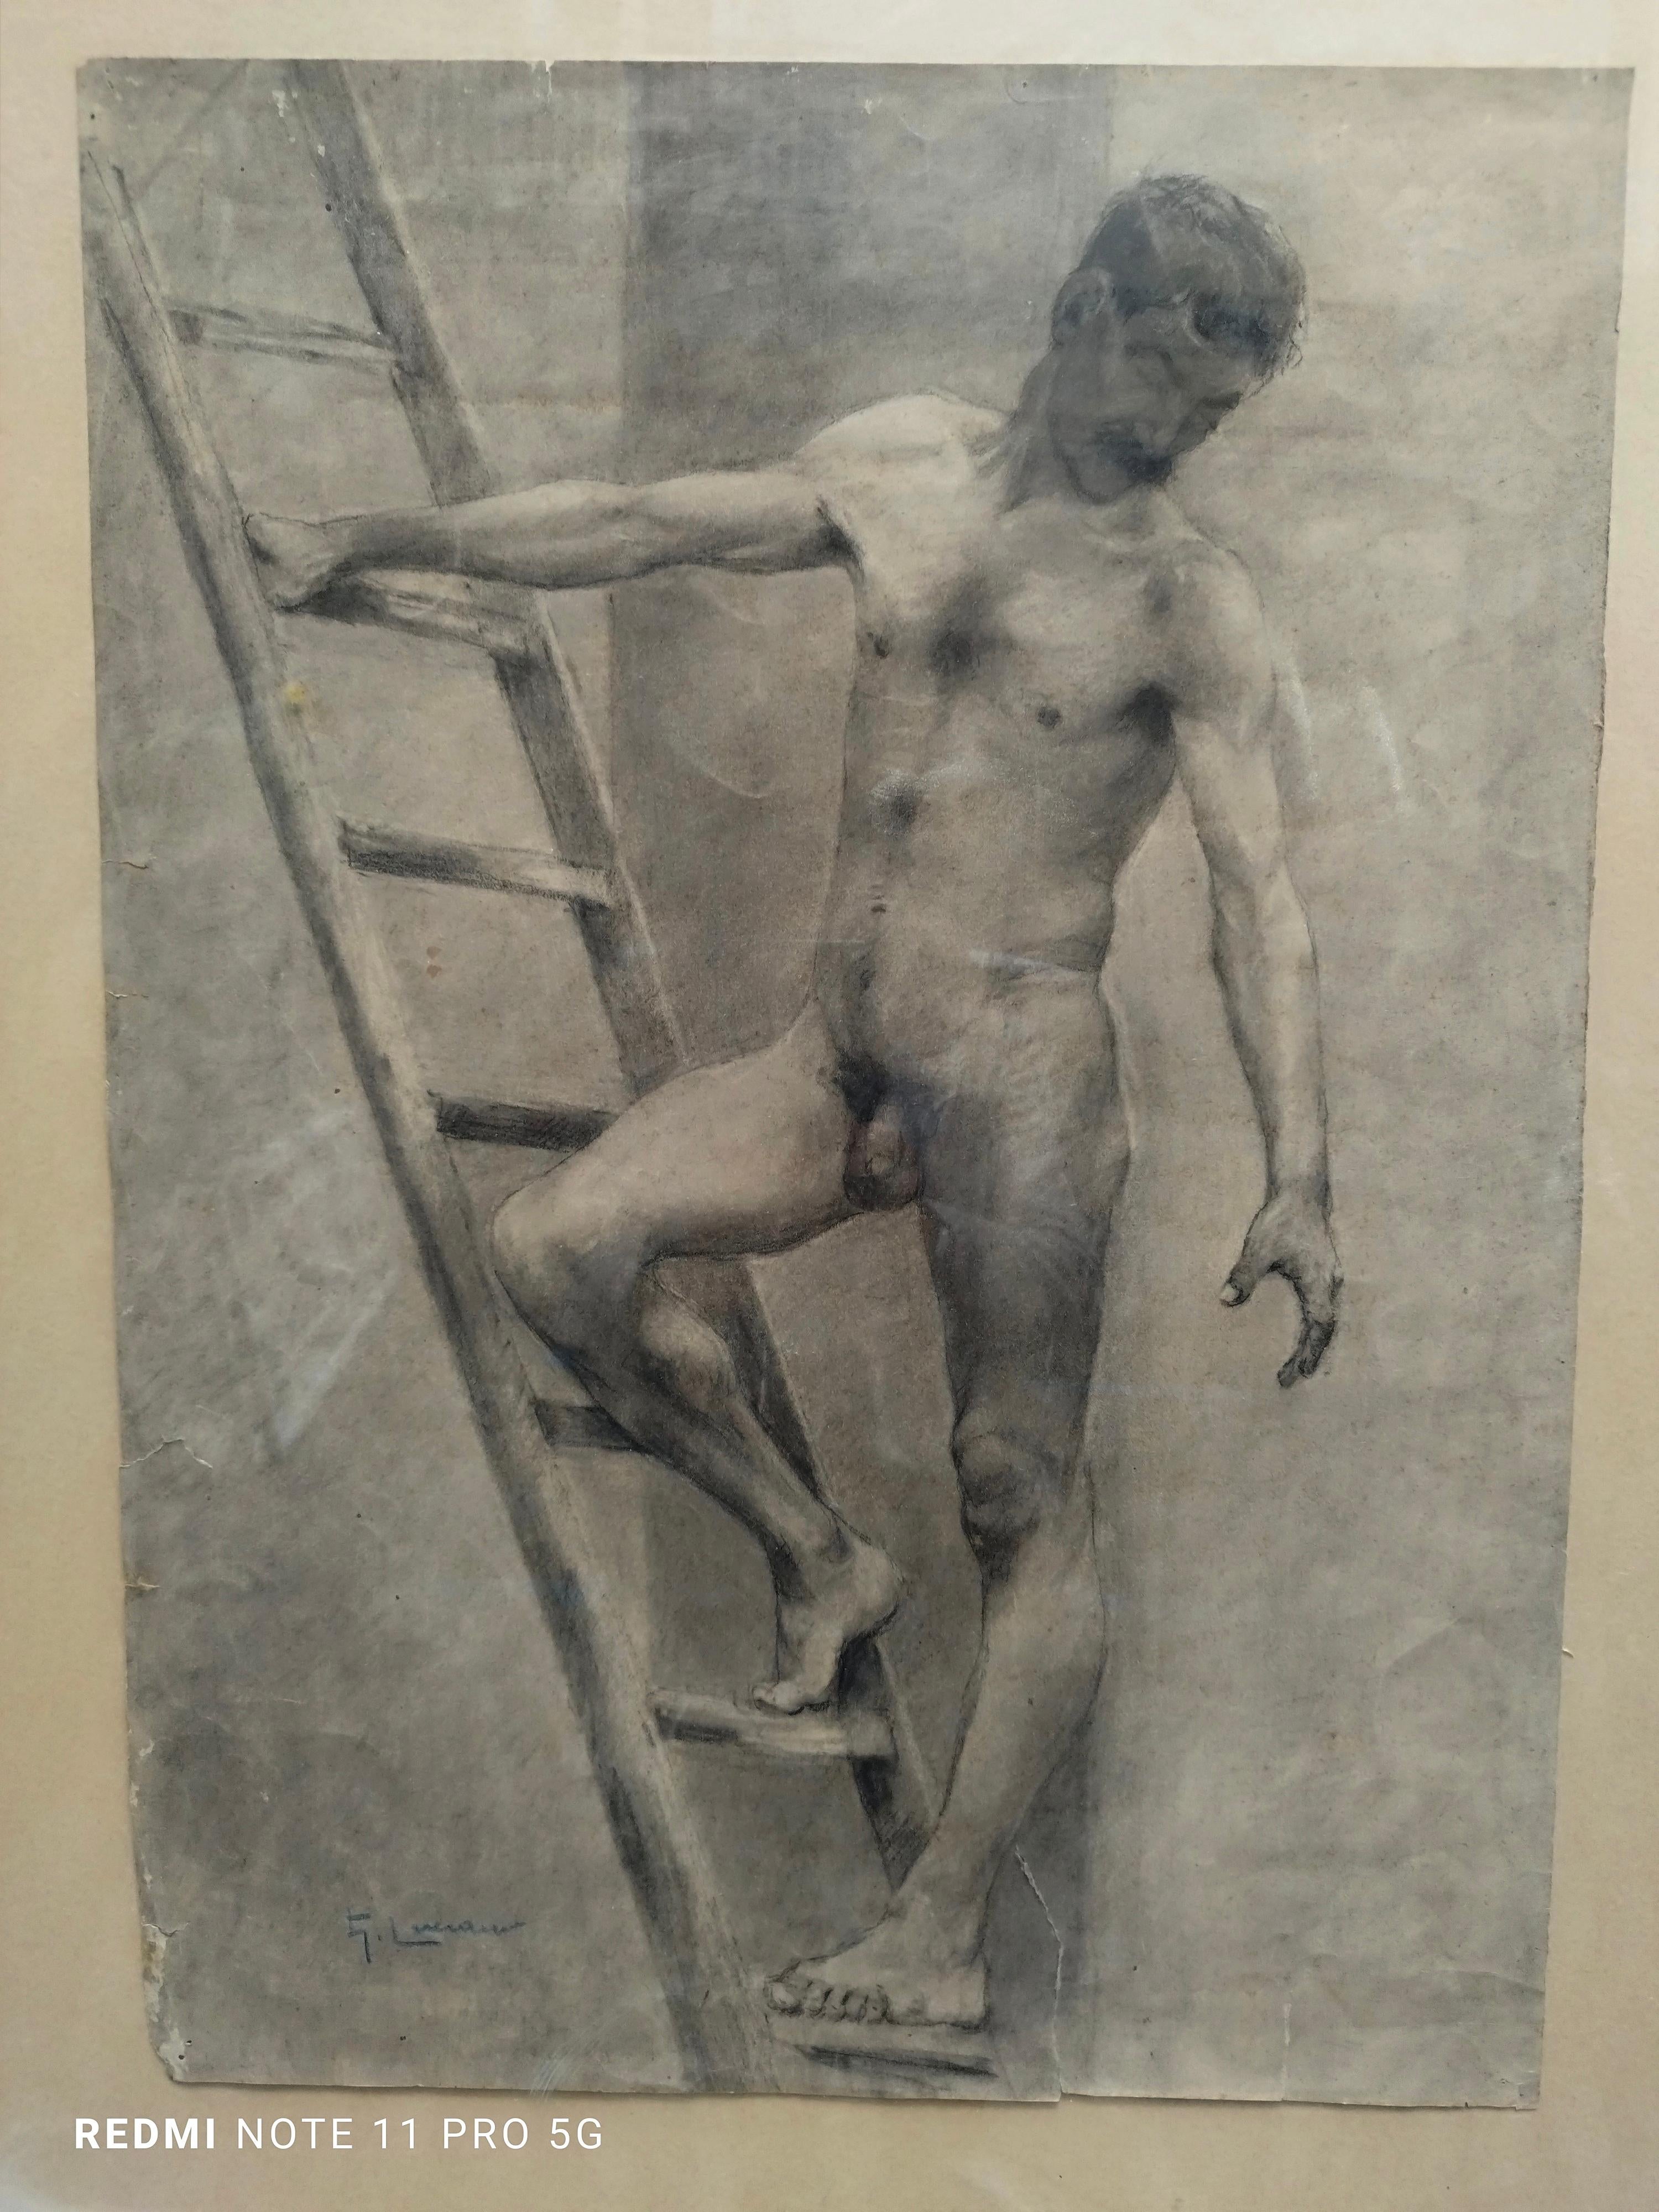 DRAWING OF A NACKED MAN ON LADDER - Painting by Gennaro Luciano